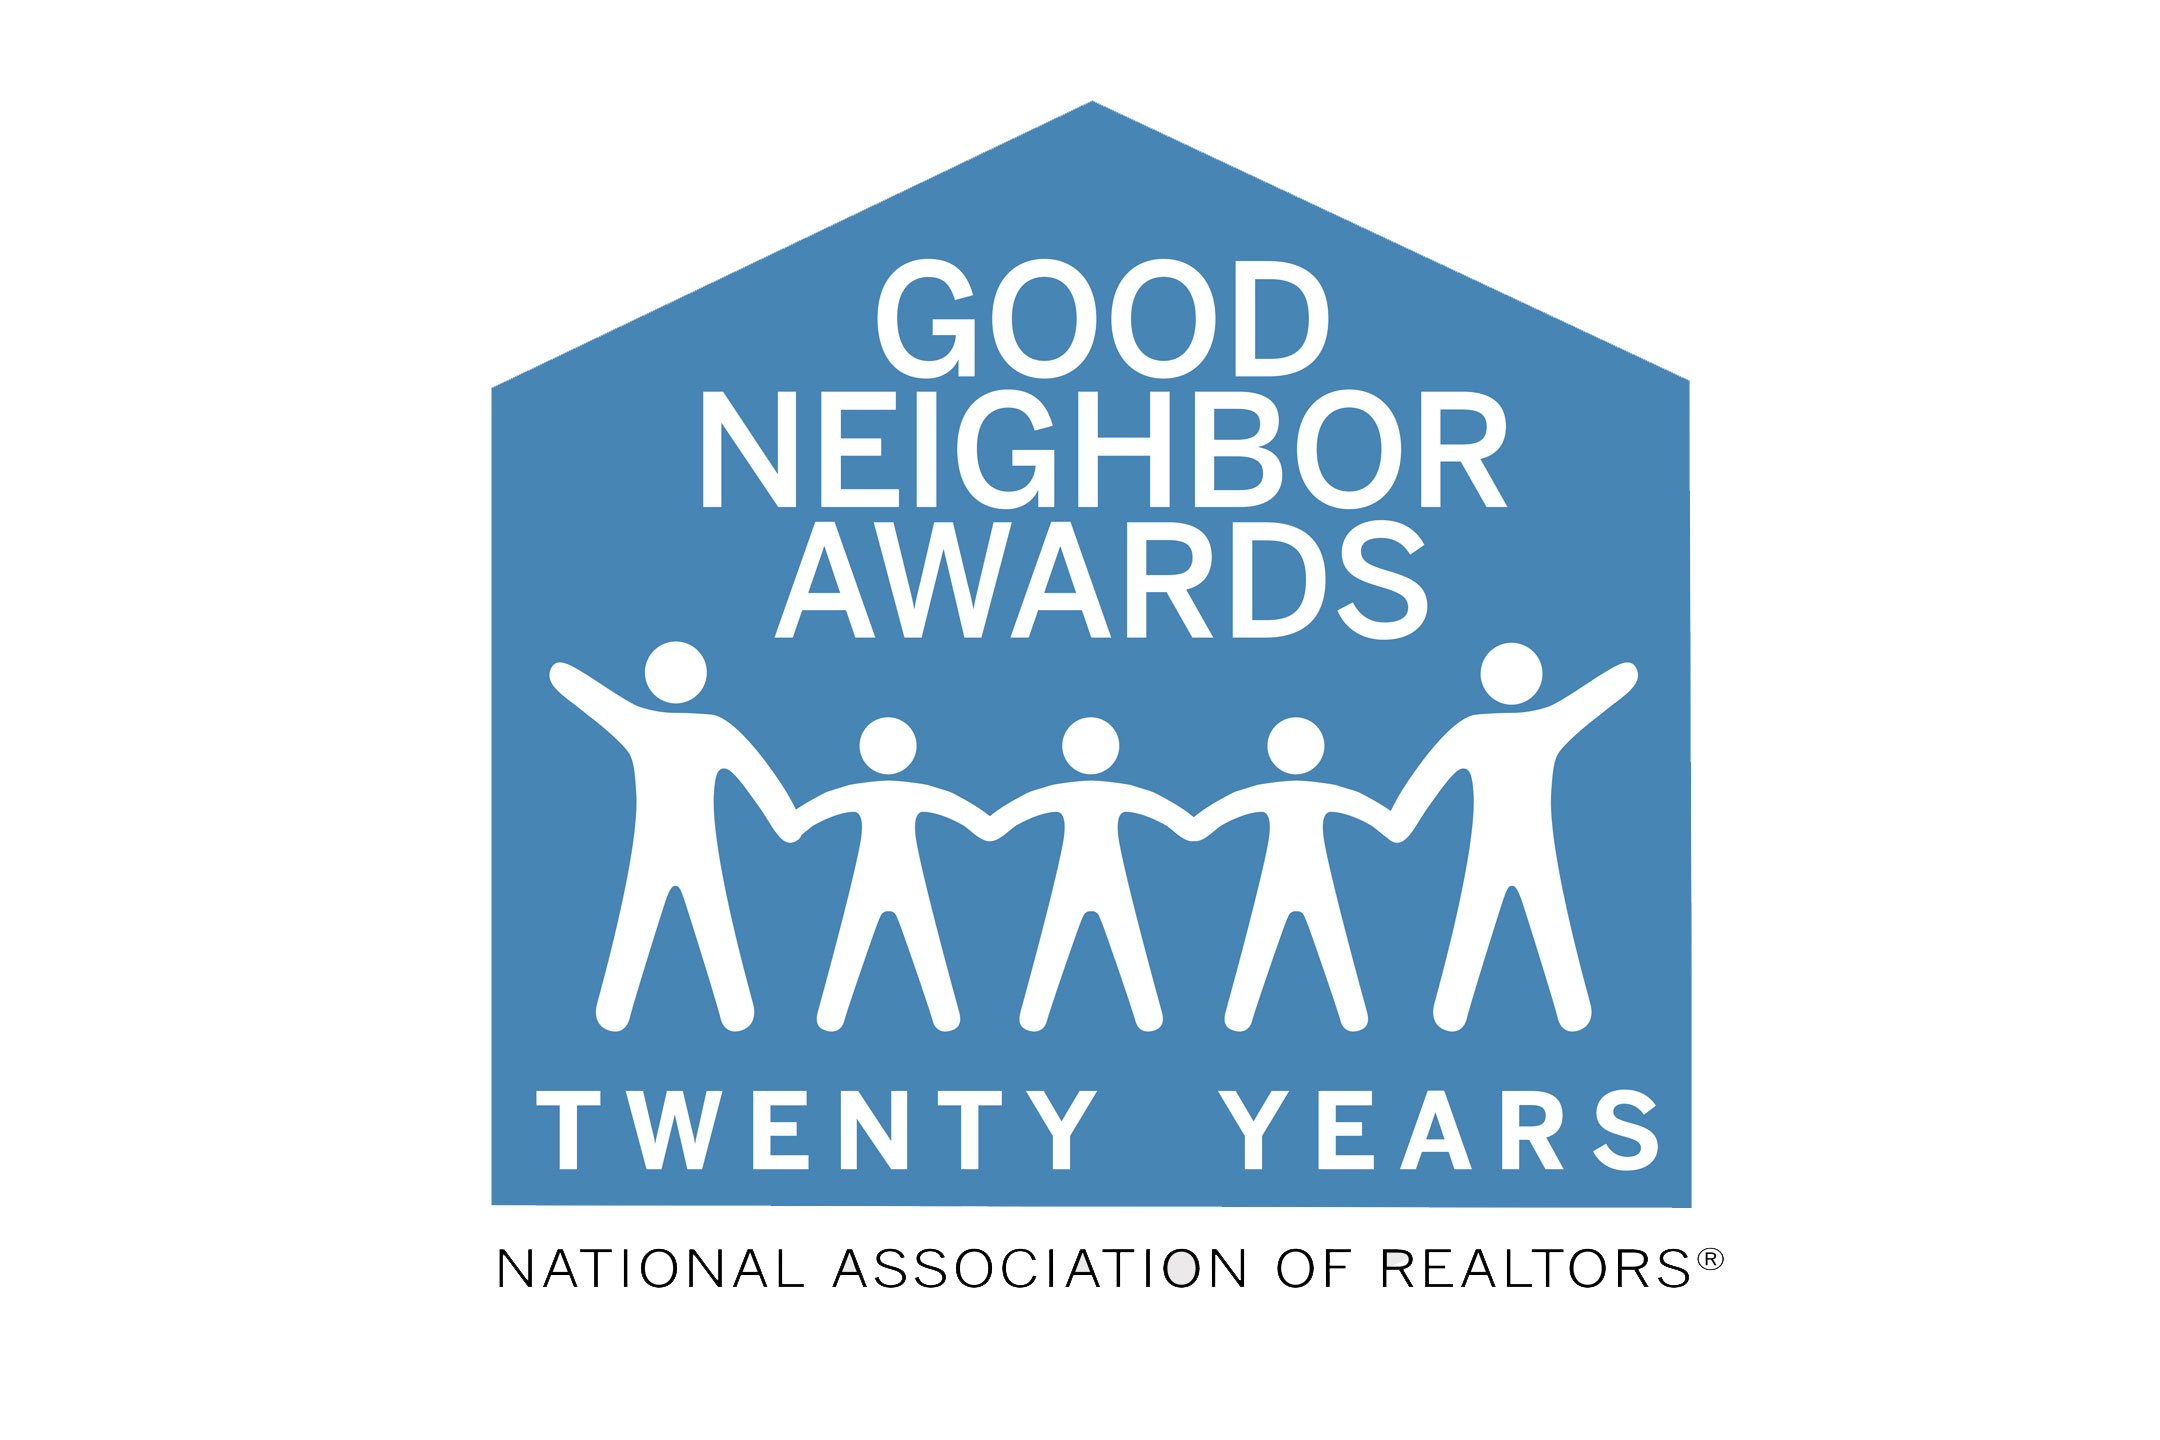 NAR is looking for Good Neighbors in 2020